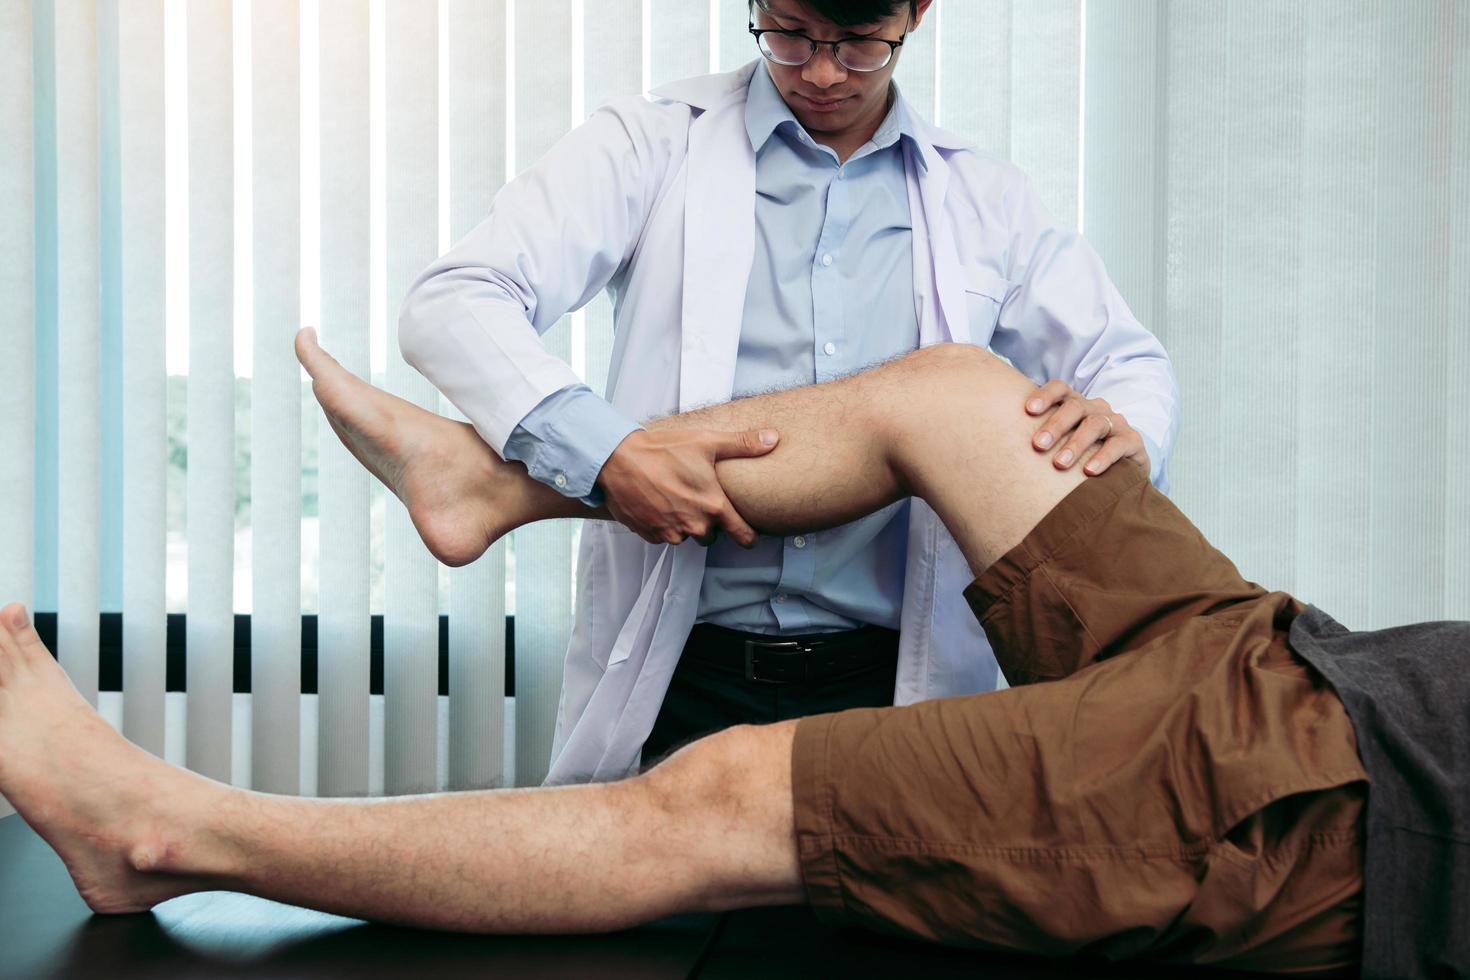 Physiotherapists are using the hands to grip the patient thigh to check for pain and massage in the clinic. photo